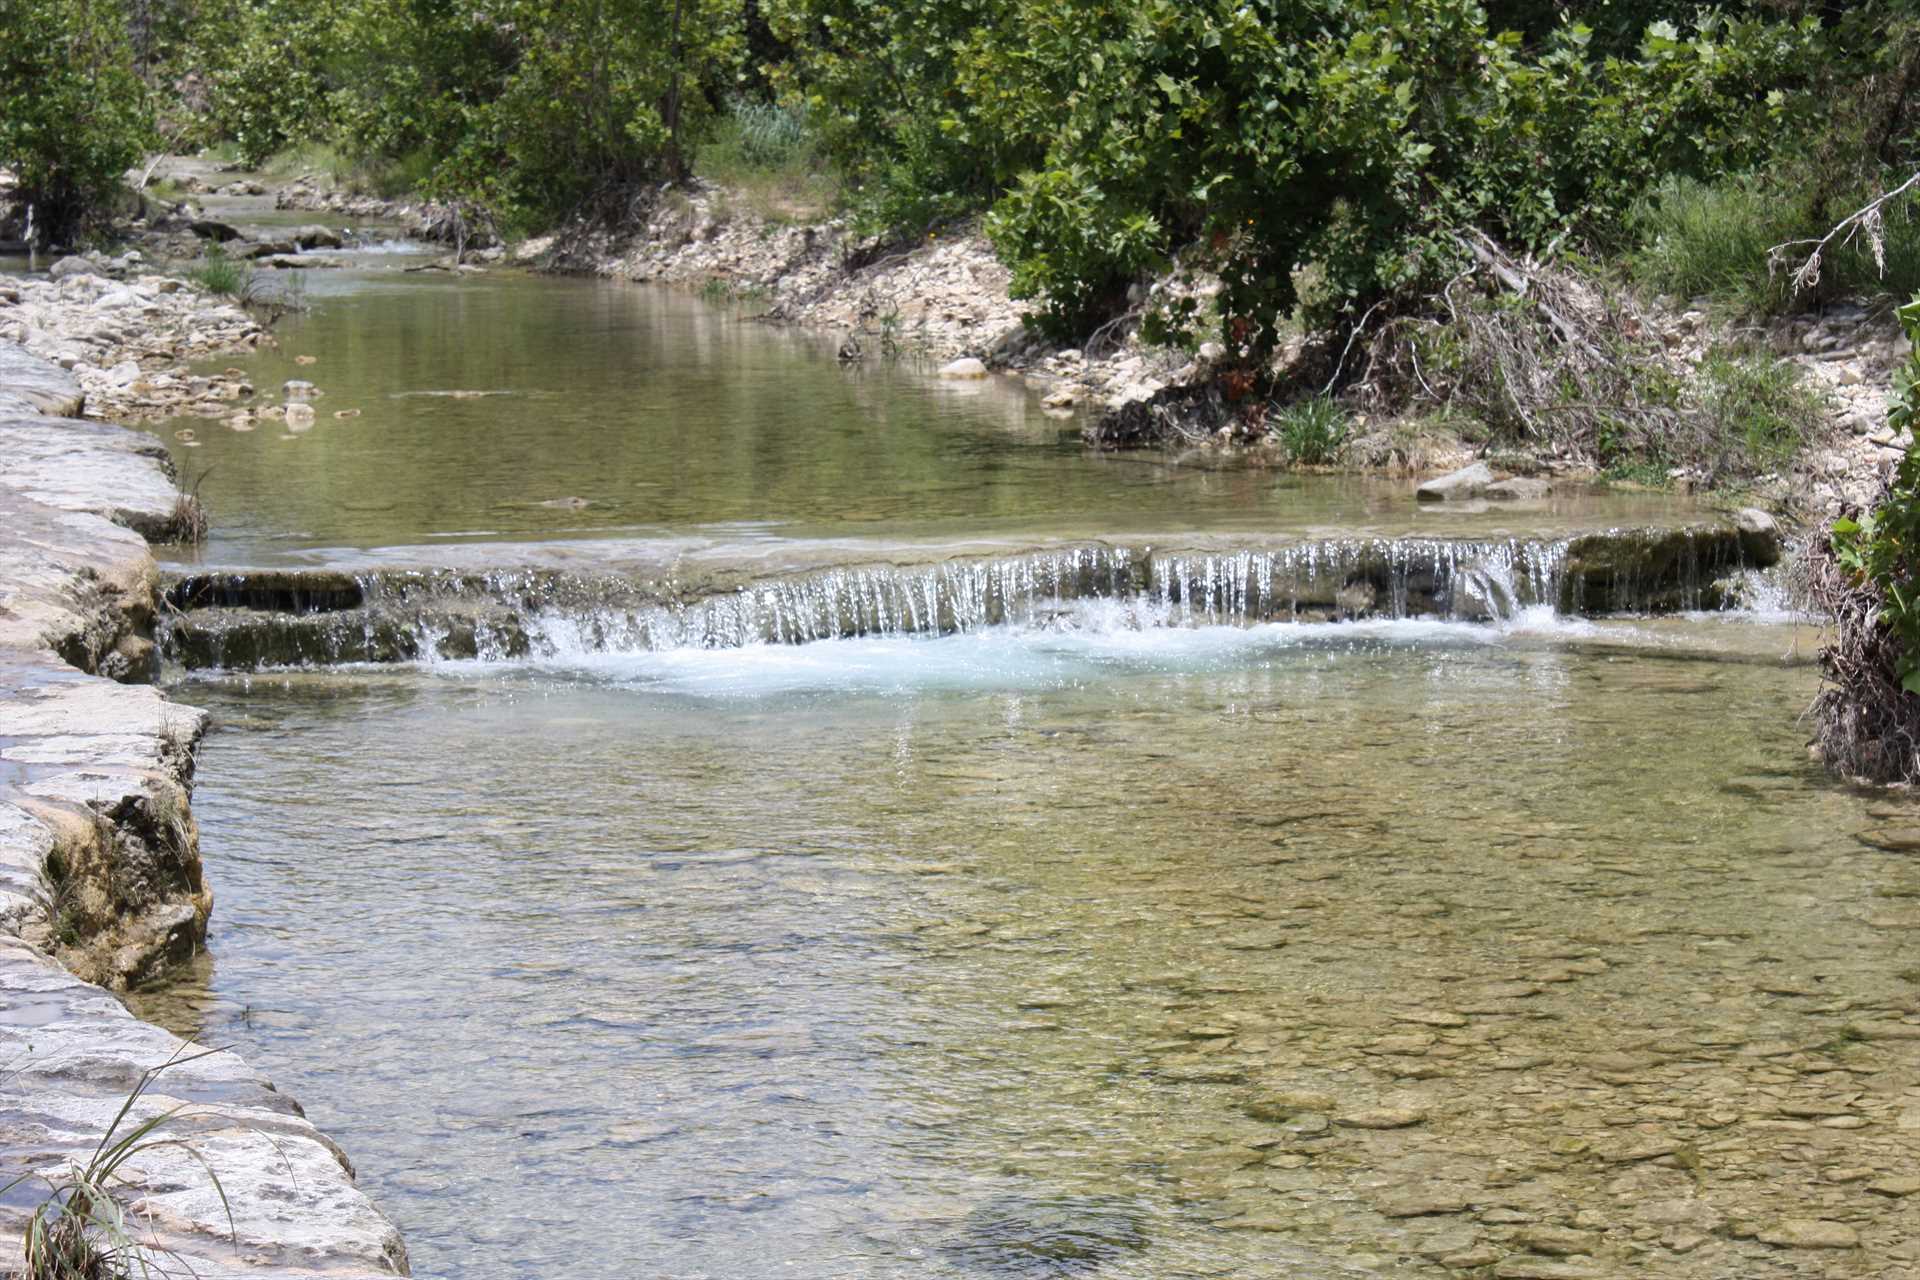                                                 Gentle falls in the creek create a soothing sound experience as you stroll along its banks.